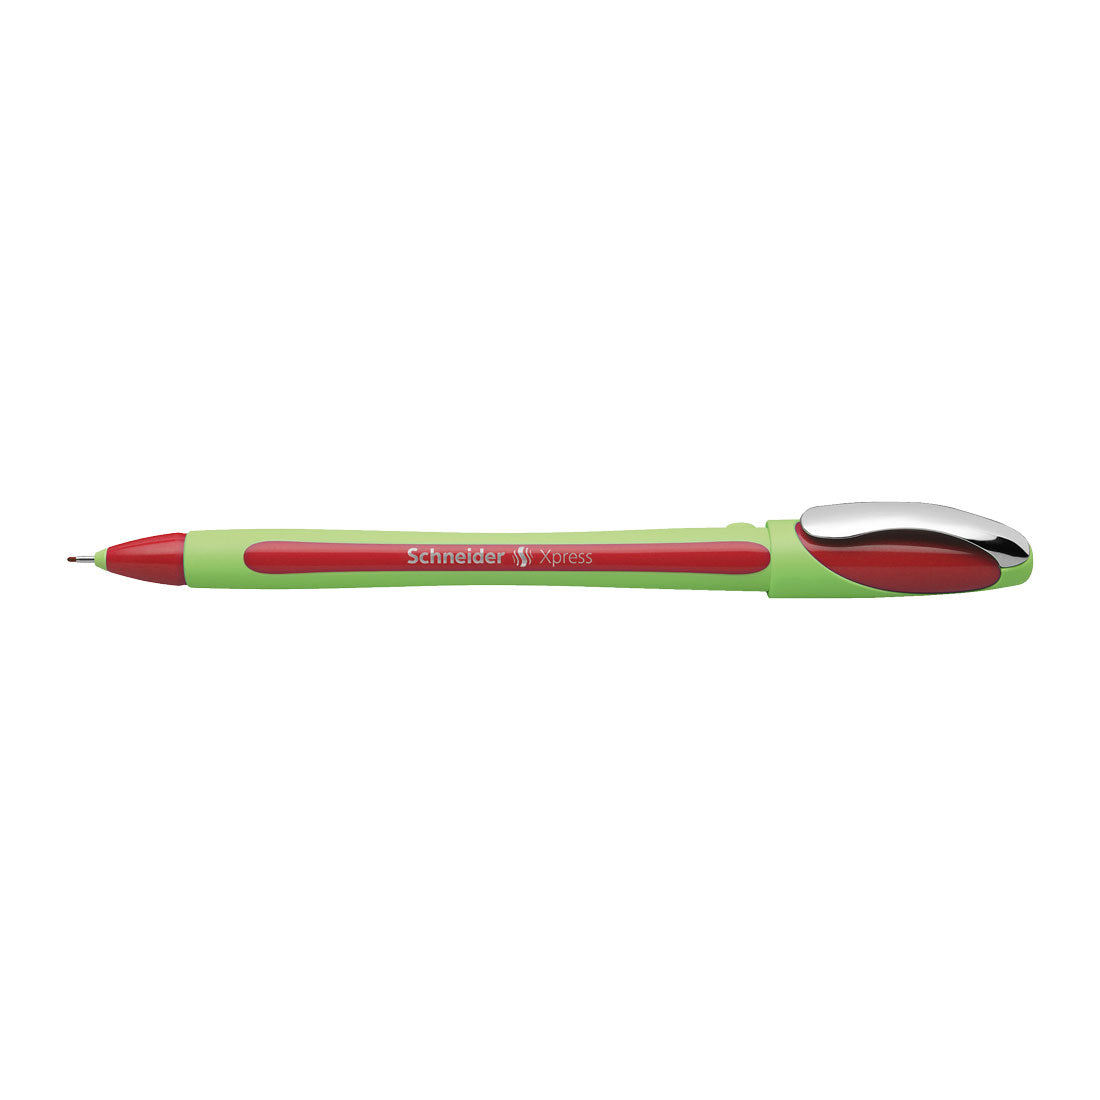 Xpress Fineliners 0.8mm, Box of 10#colour_red